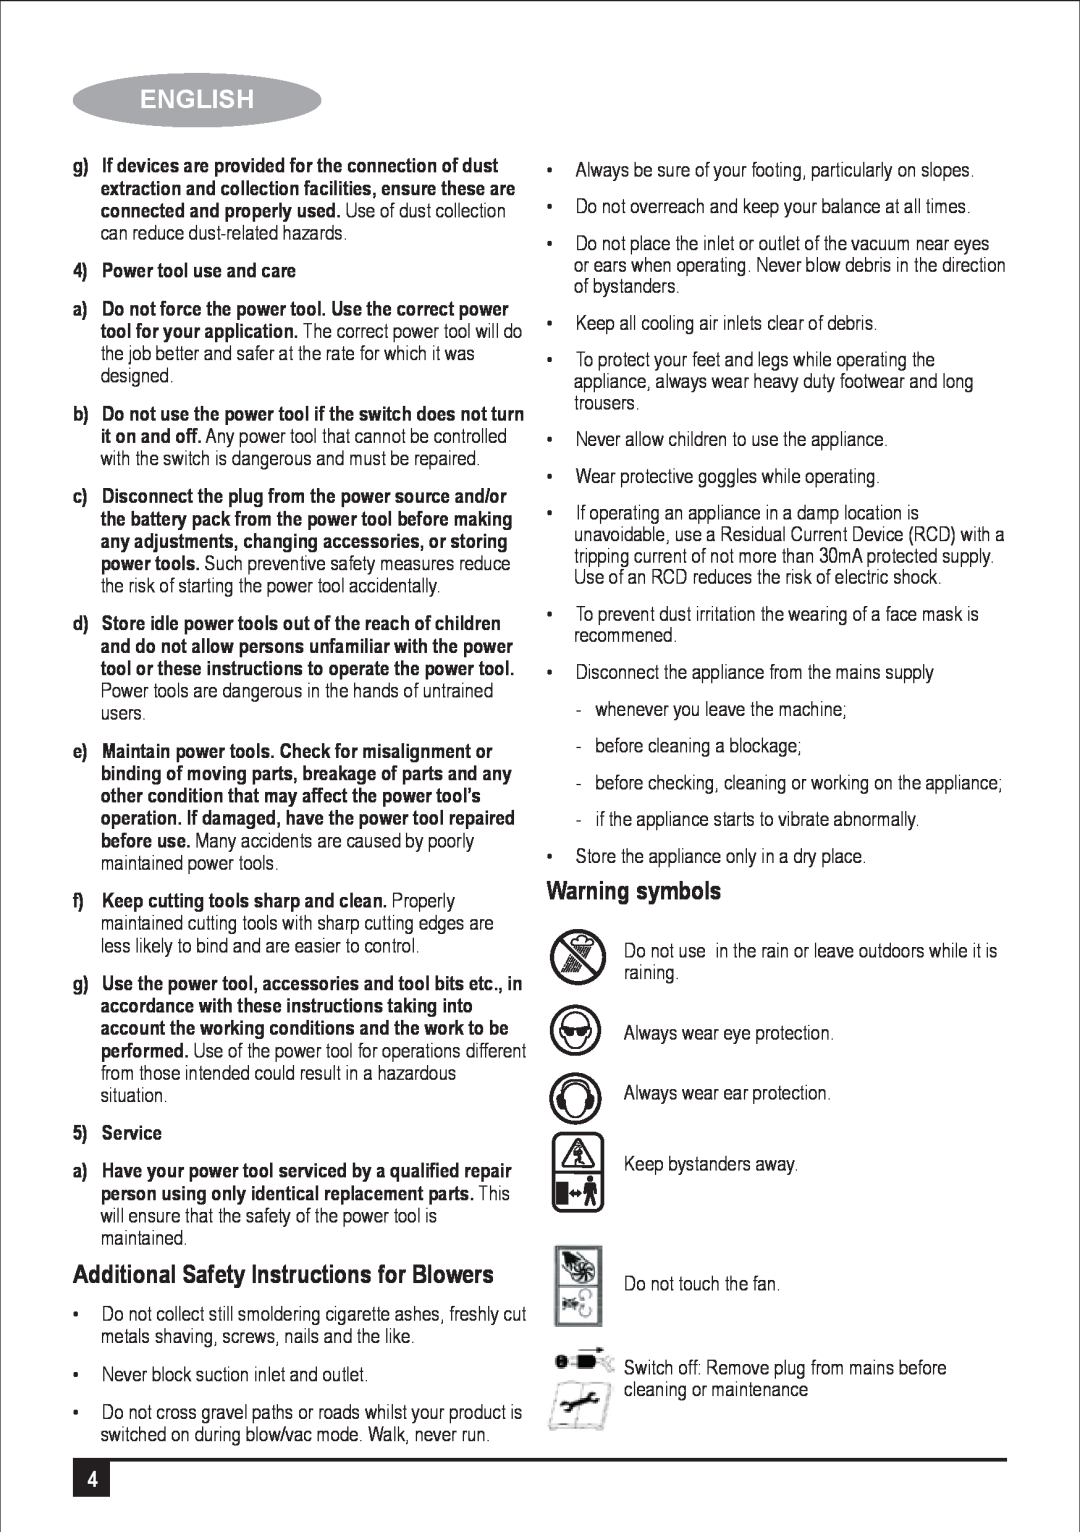 Black & Decker BPPT600 manual Warning symbols, Additional Safety Instructions for Blowers, Power tool use and care, Service 